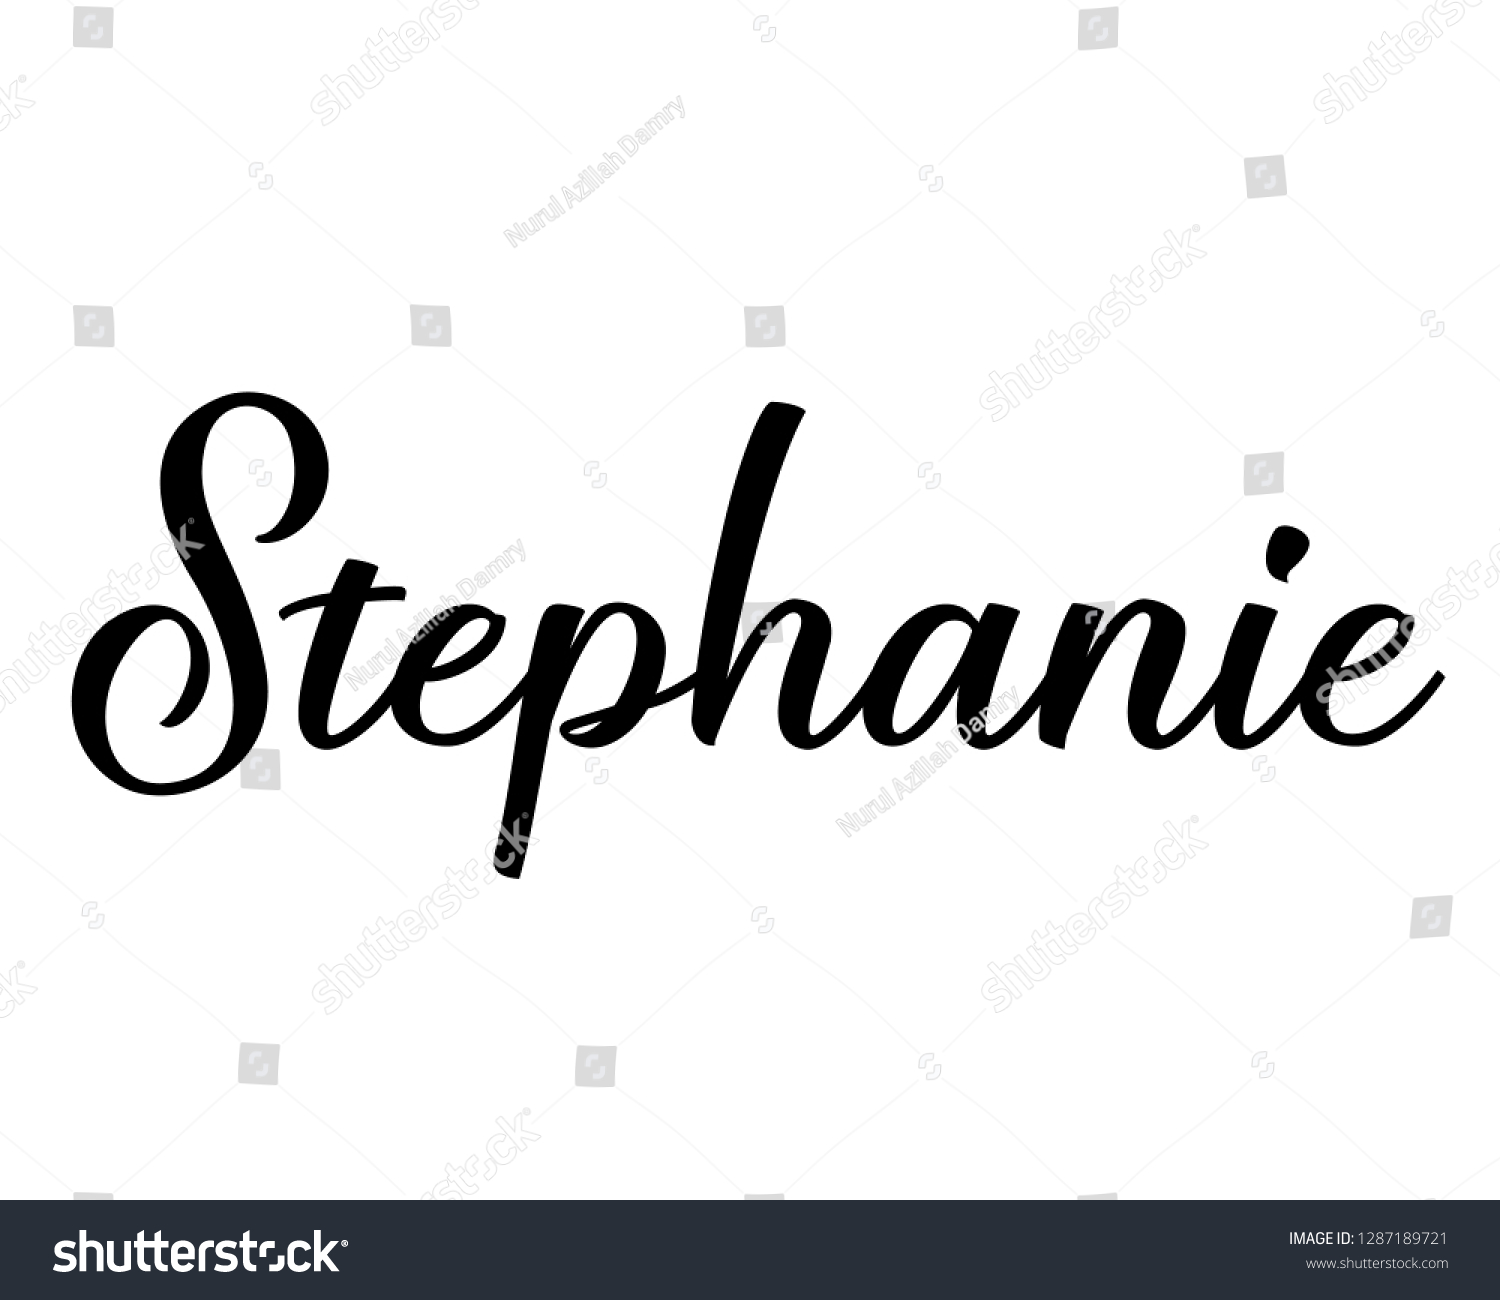 Typography Word Art Person Name Design Stock Vector (Royalty Free ...